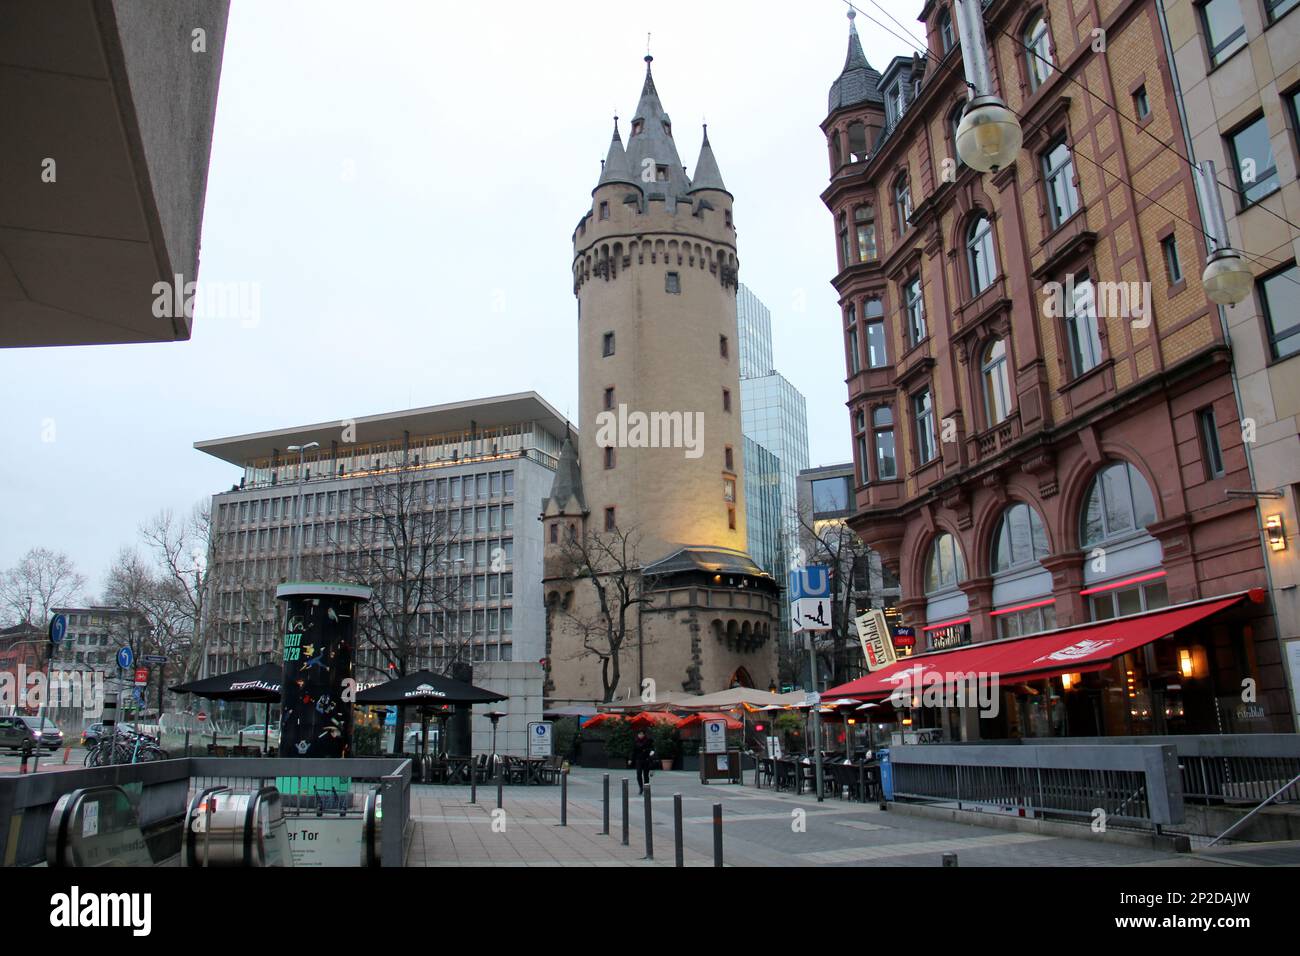 Eschenheimer Turm, late-medieval city gate tower, erected at the beginning of 15th century, view in the early evening light, Frankfurt, Germany Stock Photo